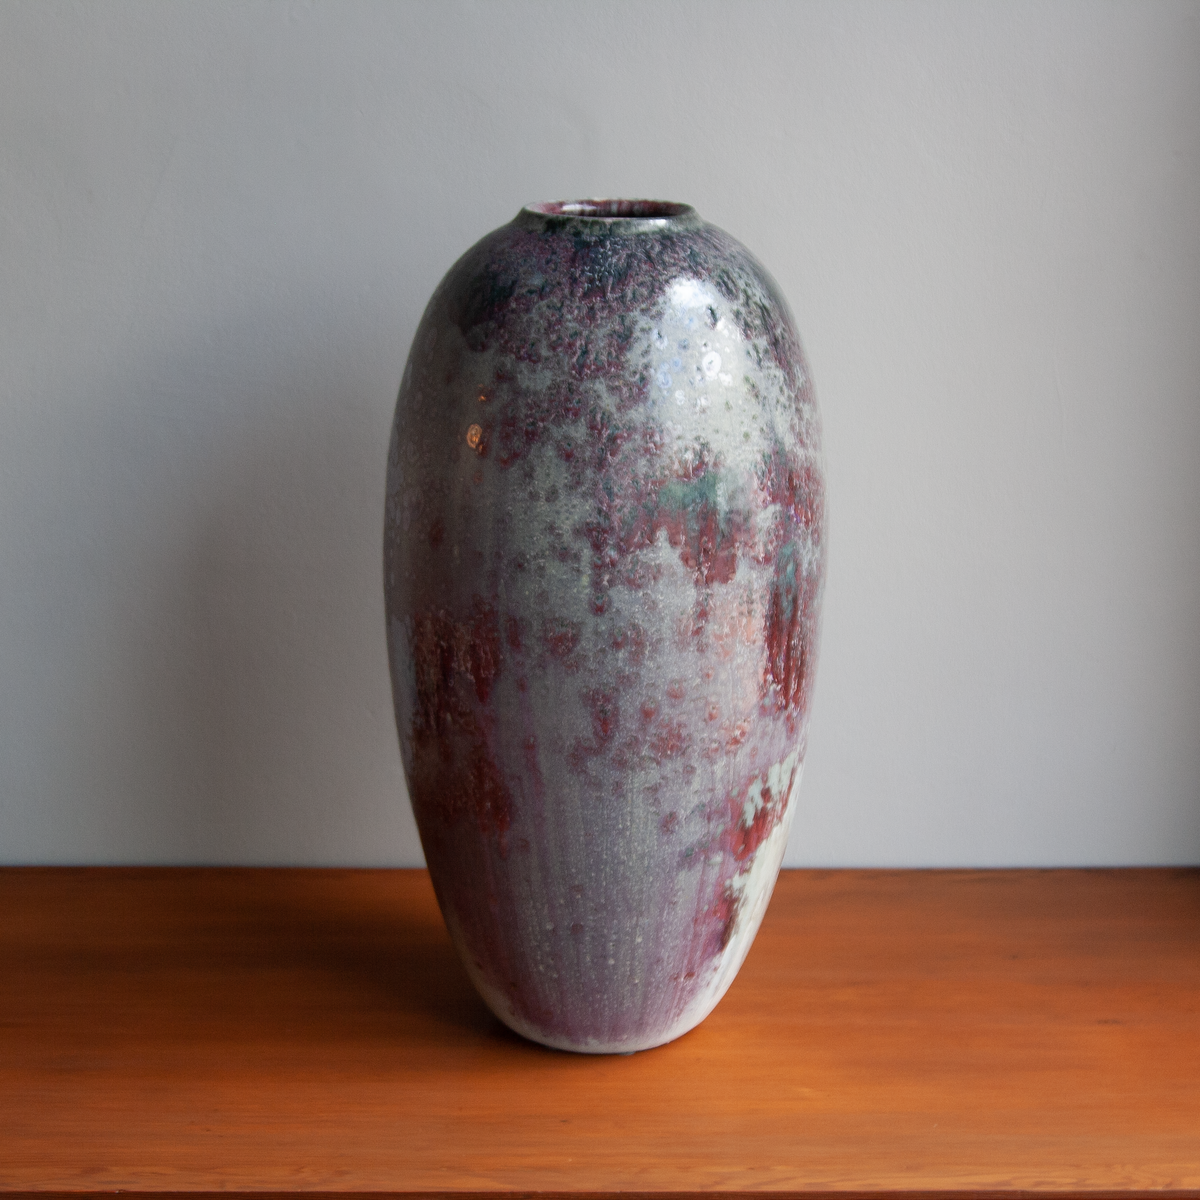 Completion of purchase for: Large Purple Vessel | Light Glass